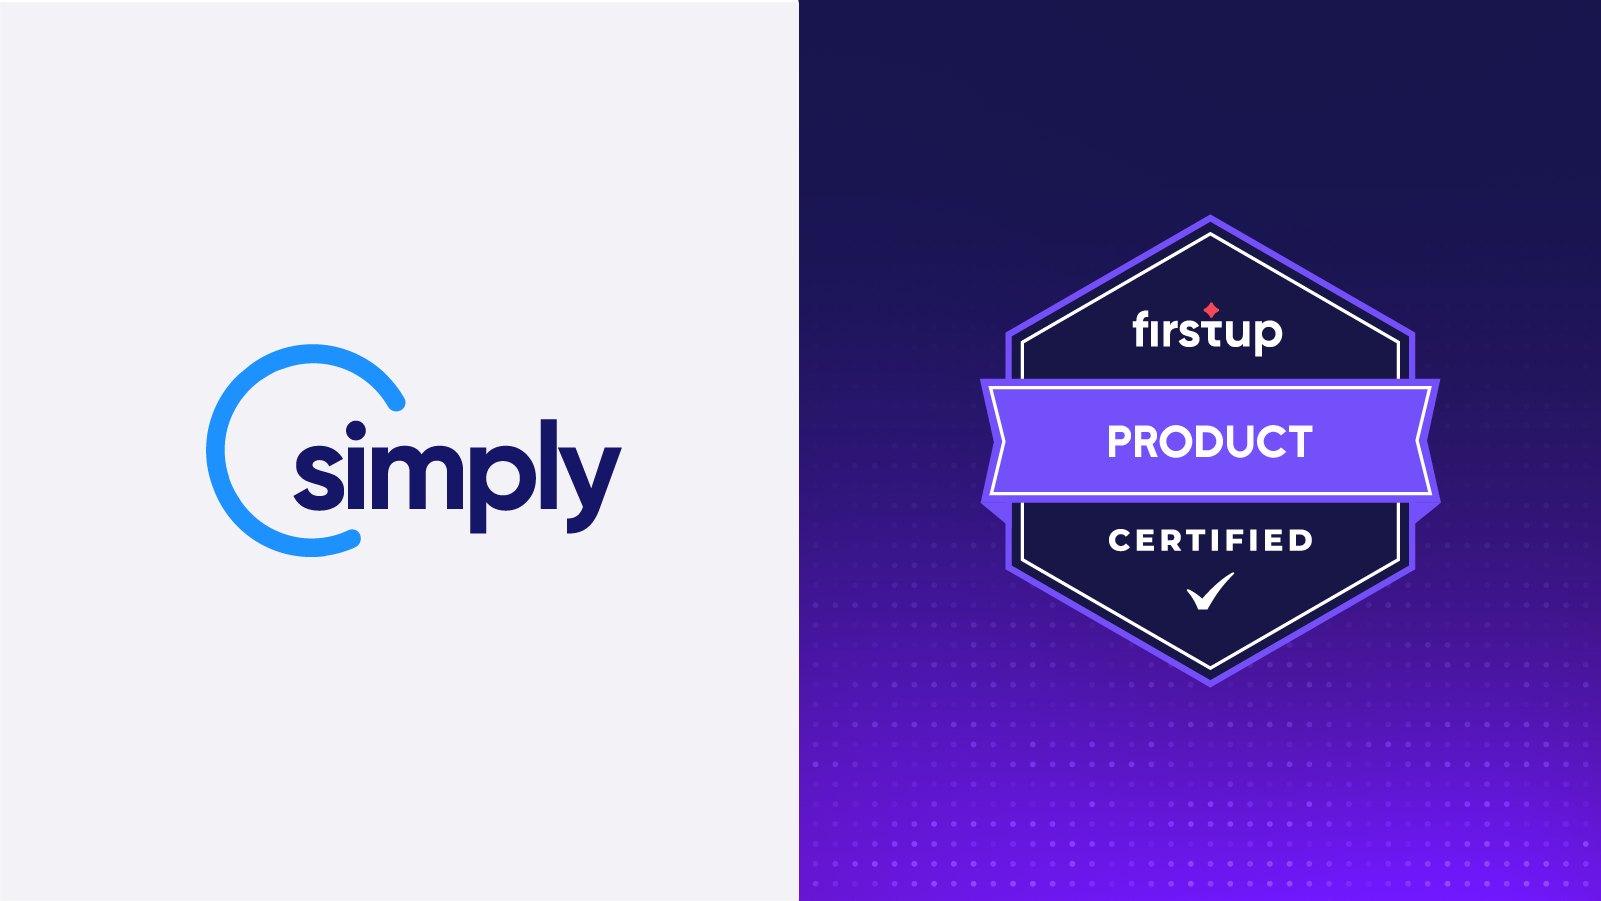 Simply Product Certified SocialGraphic